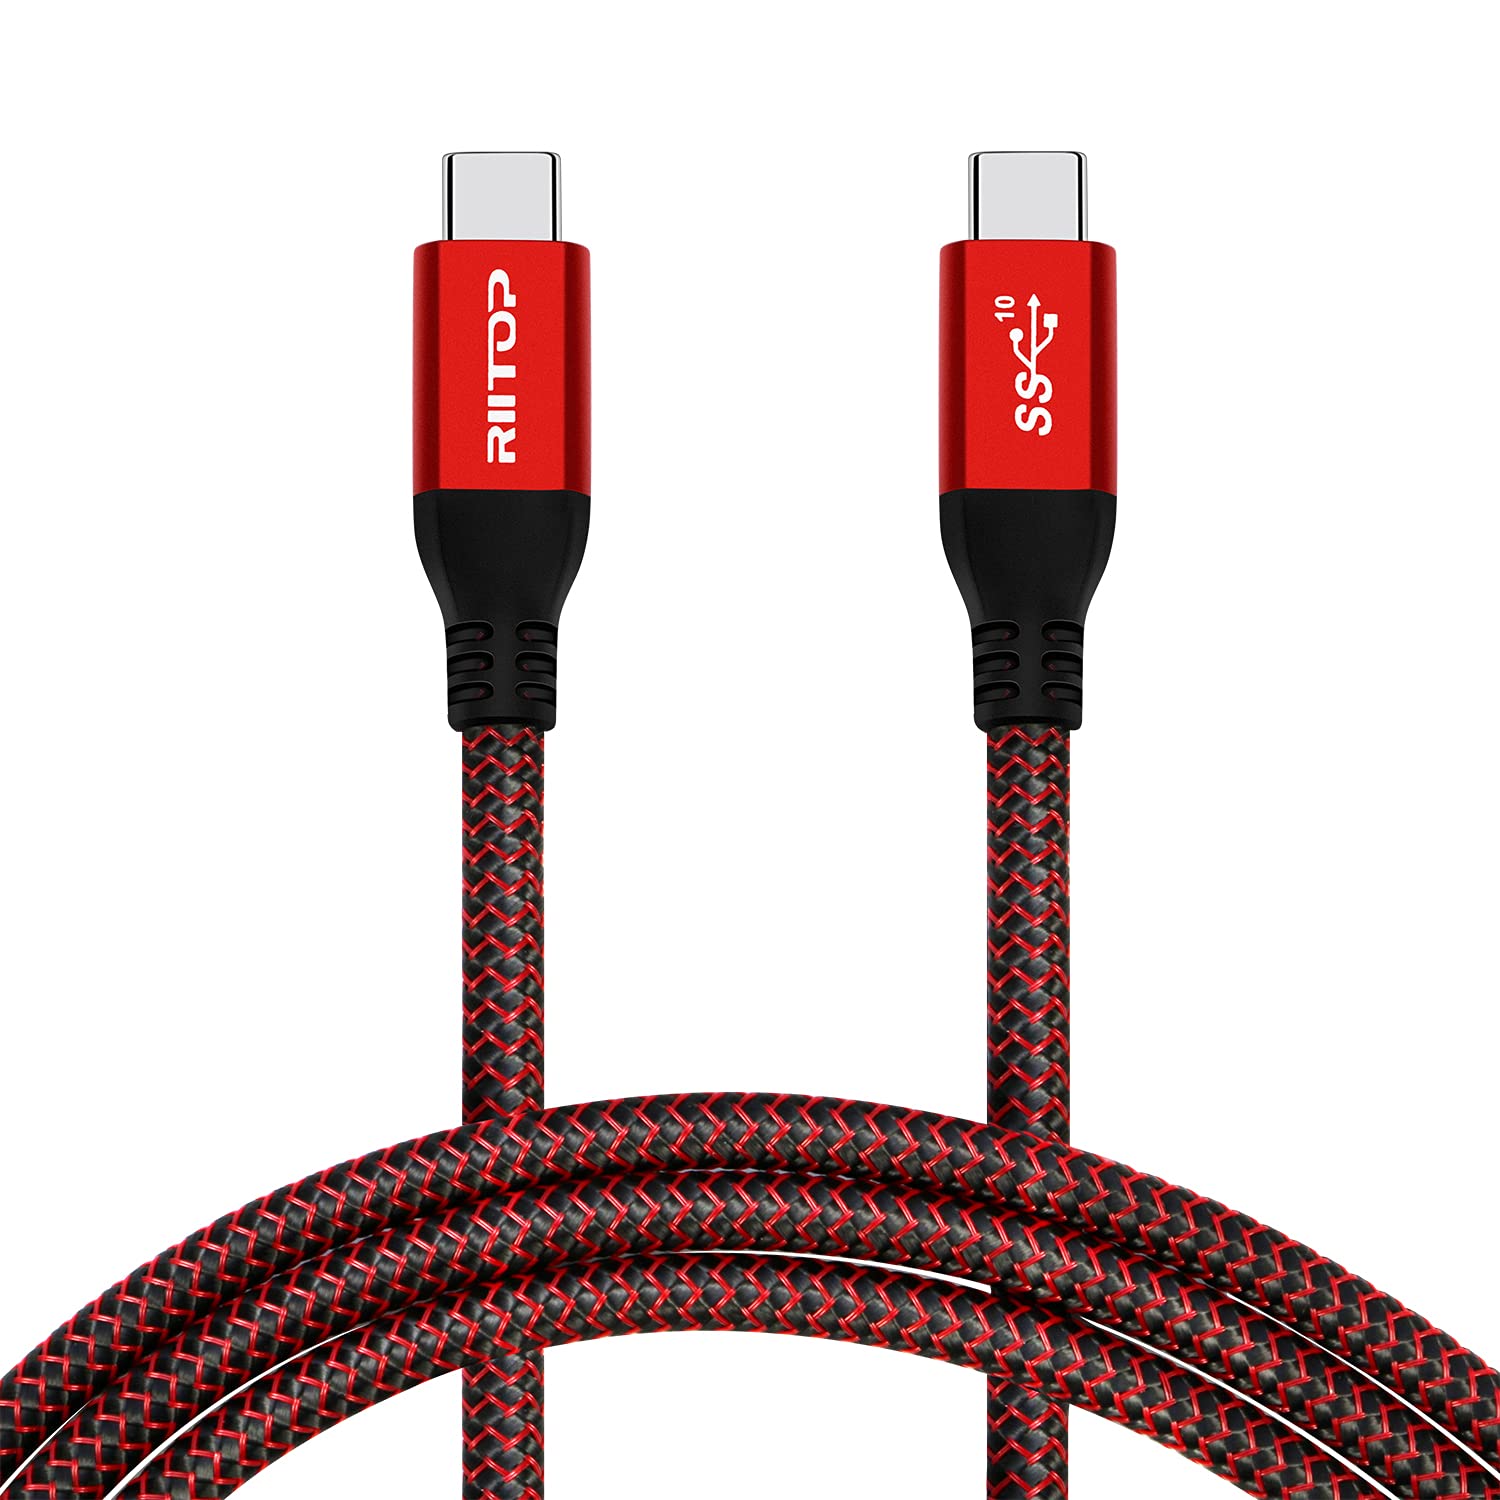 Cable USB-C w/ 5A PD - USB 3.0 5Gbps 6ft - USB-C Cables, Cables